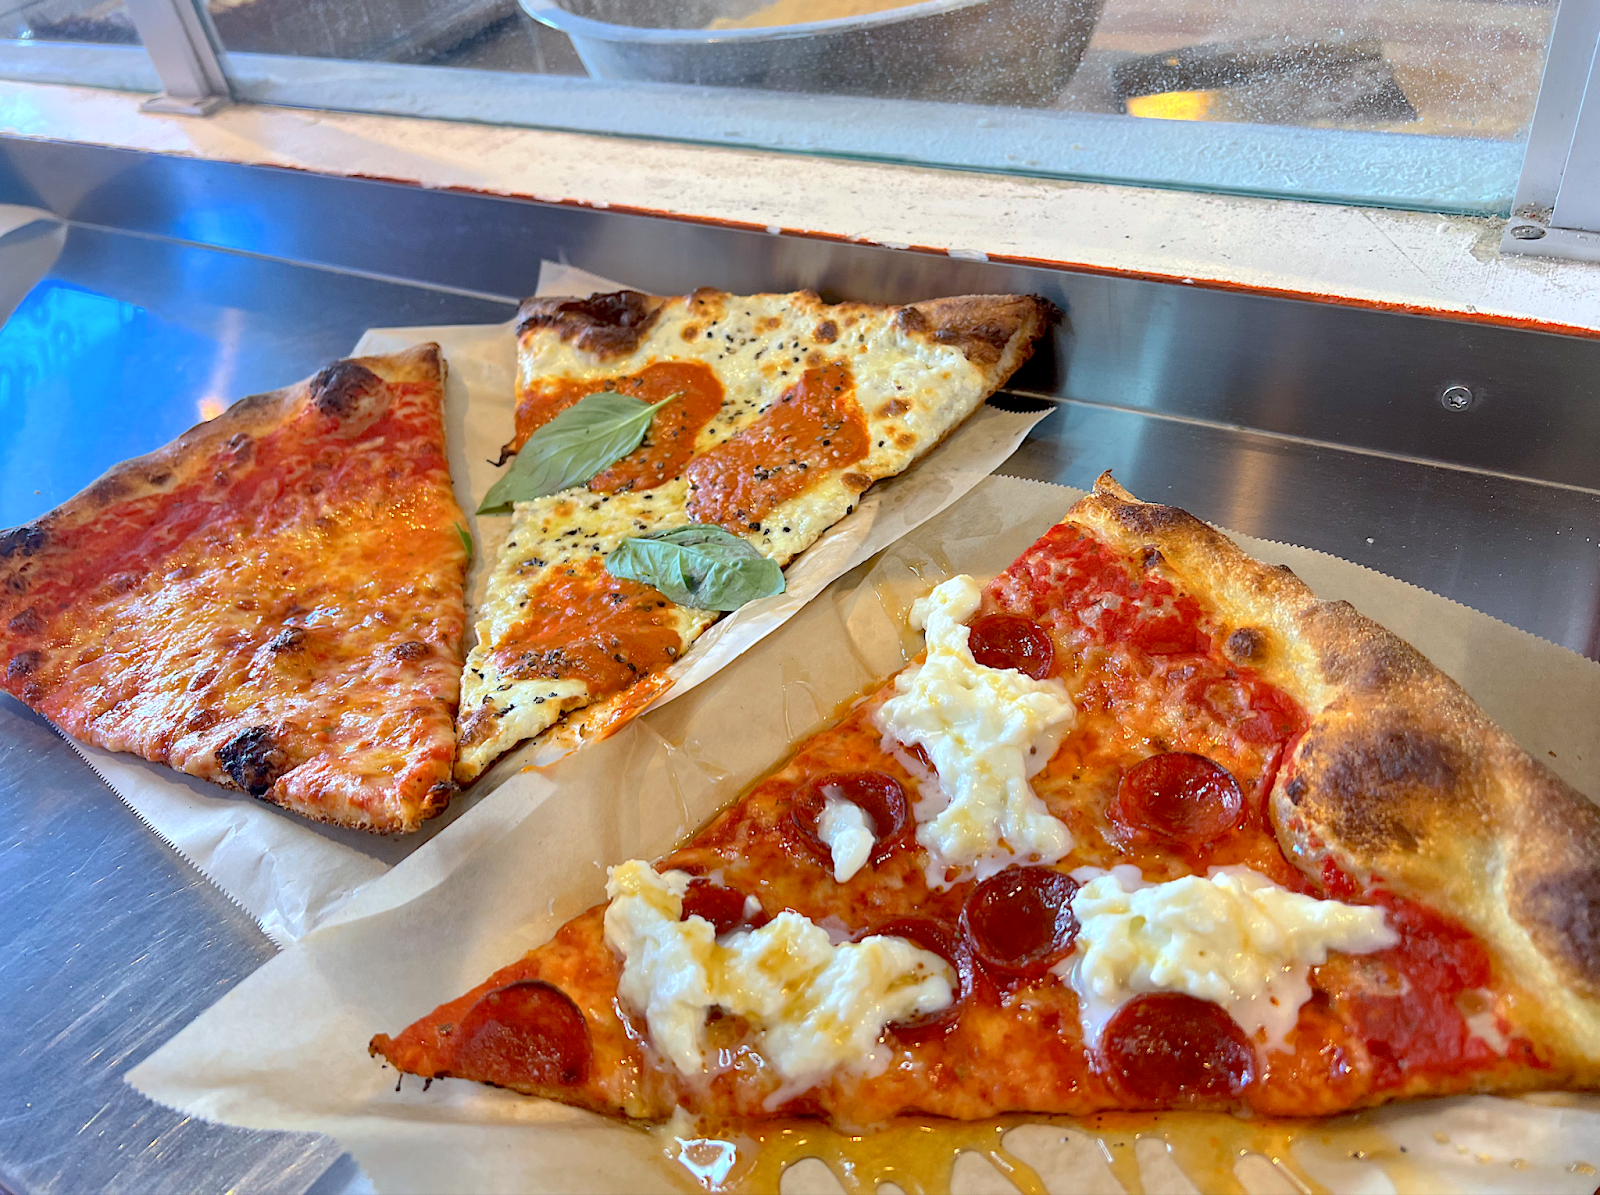 How a beloved New York pizza place ended up in the California suburbs